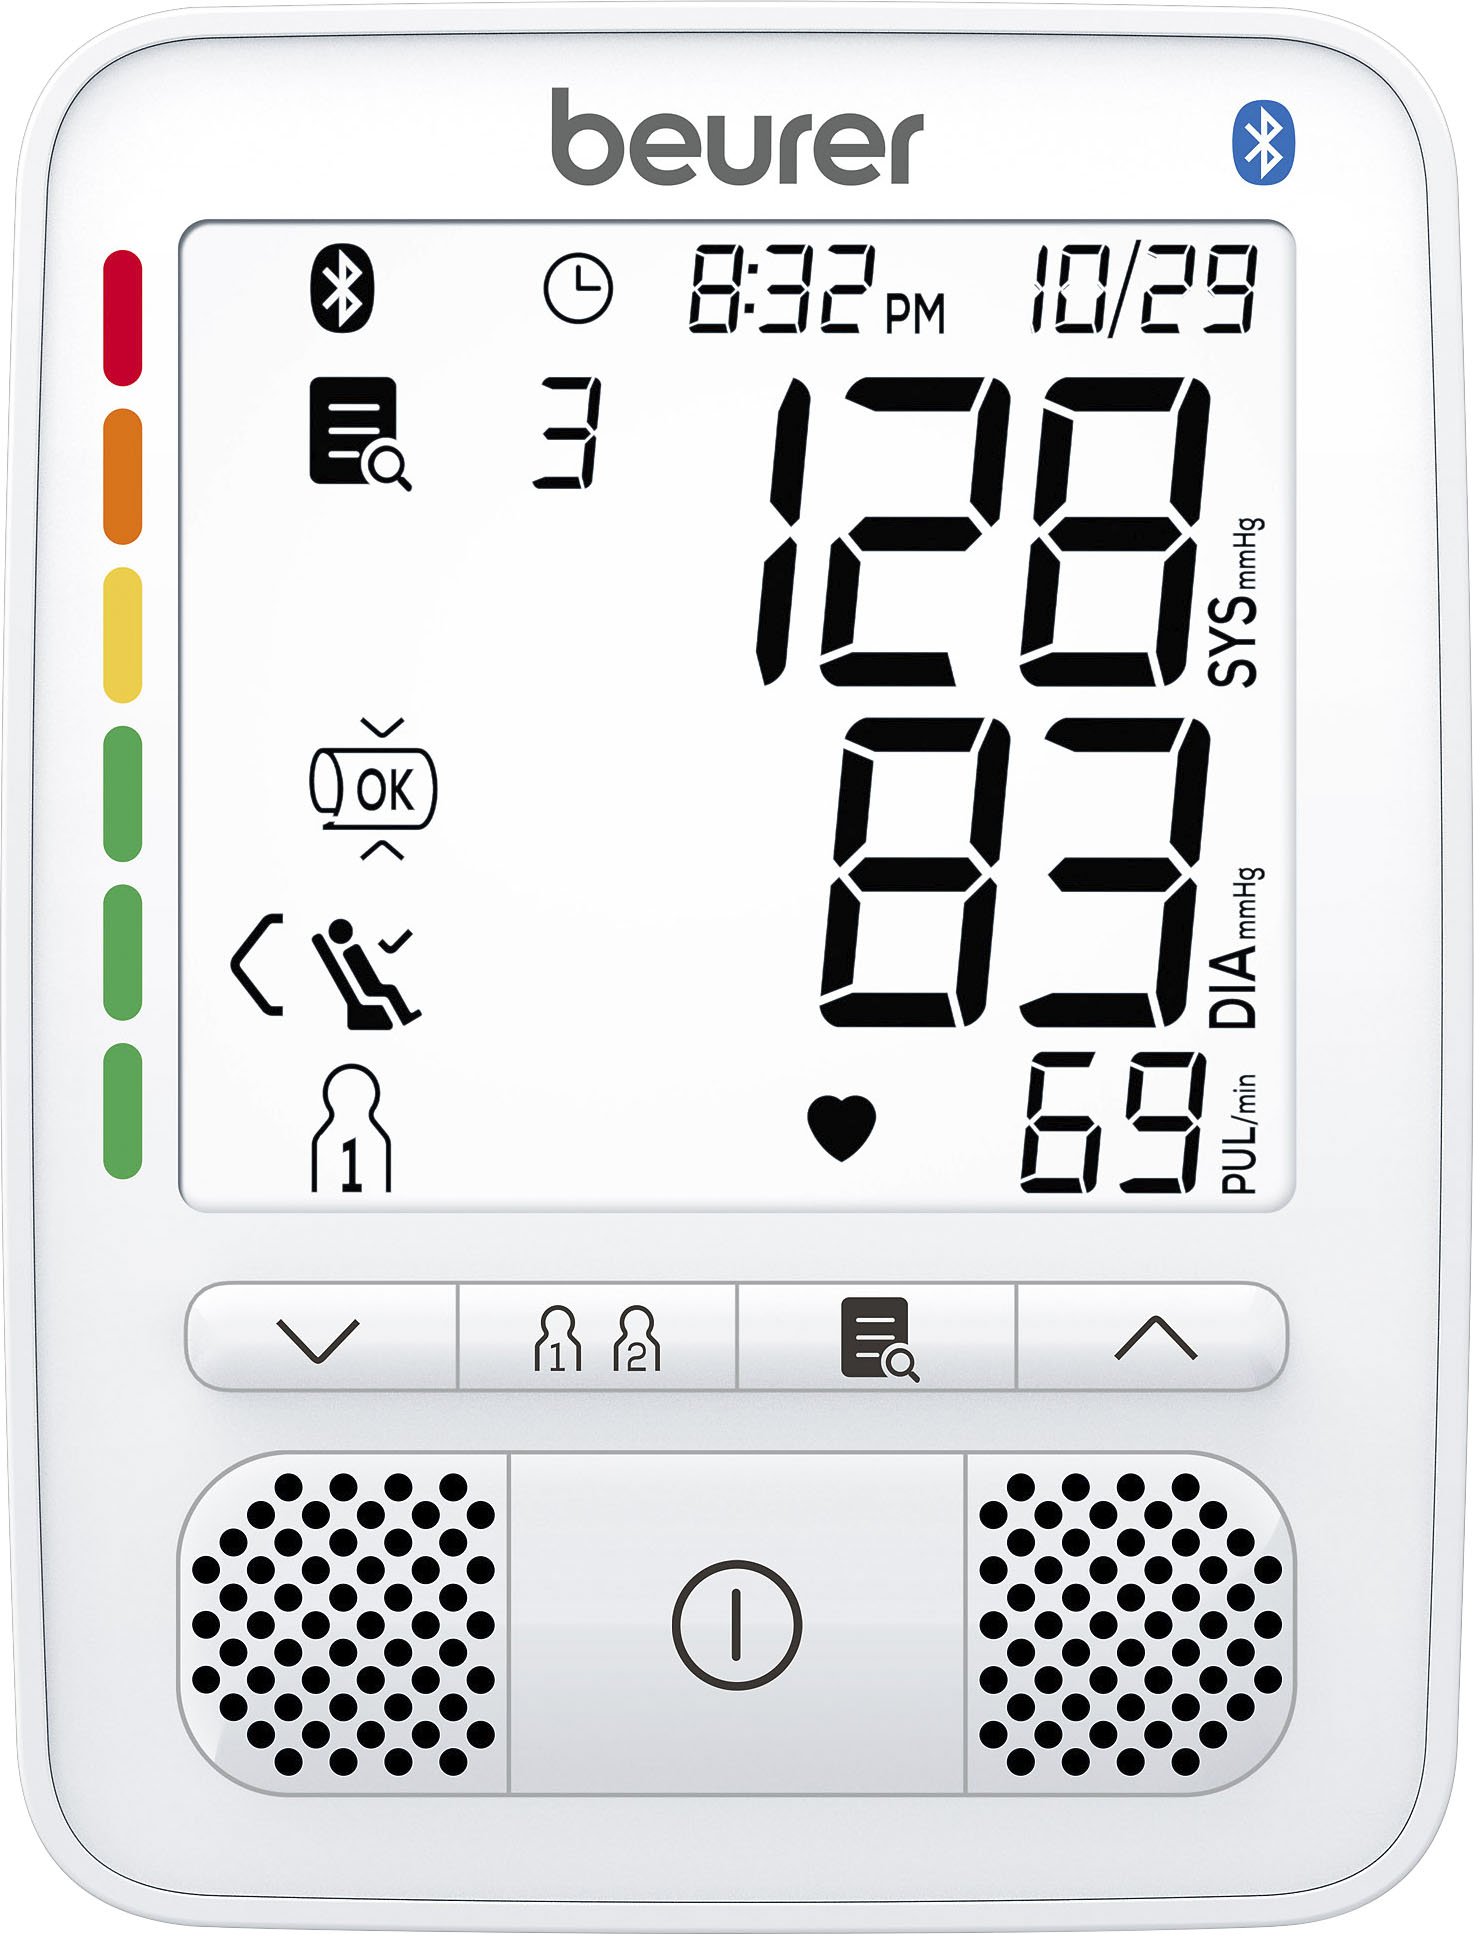 New LED Rechargeable Wrist Blood Pressure Monitor English